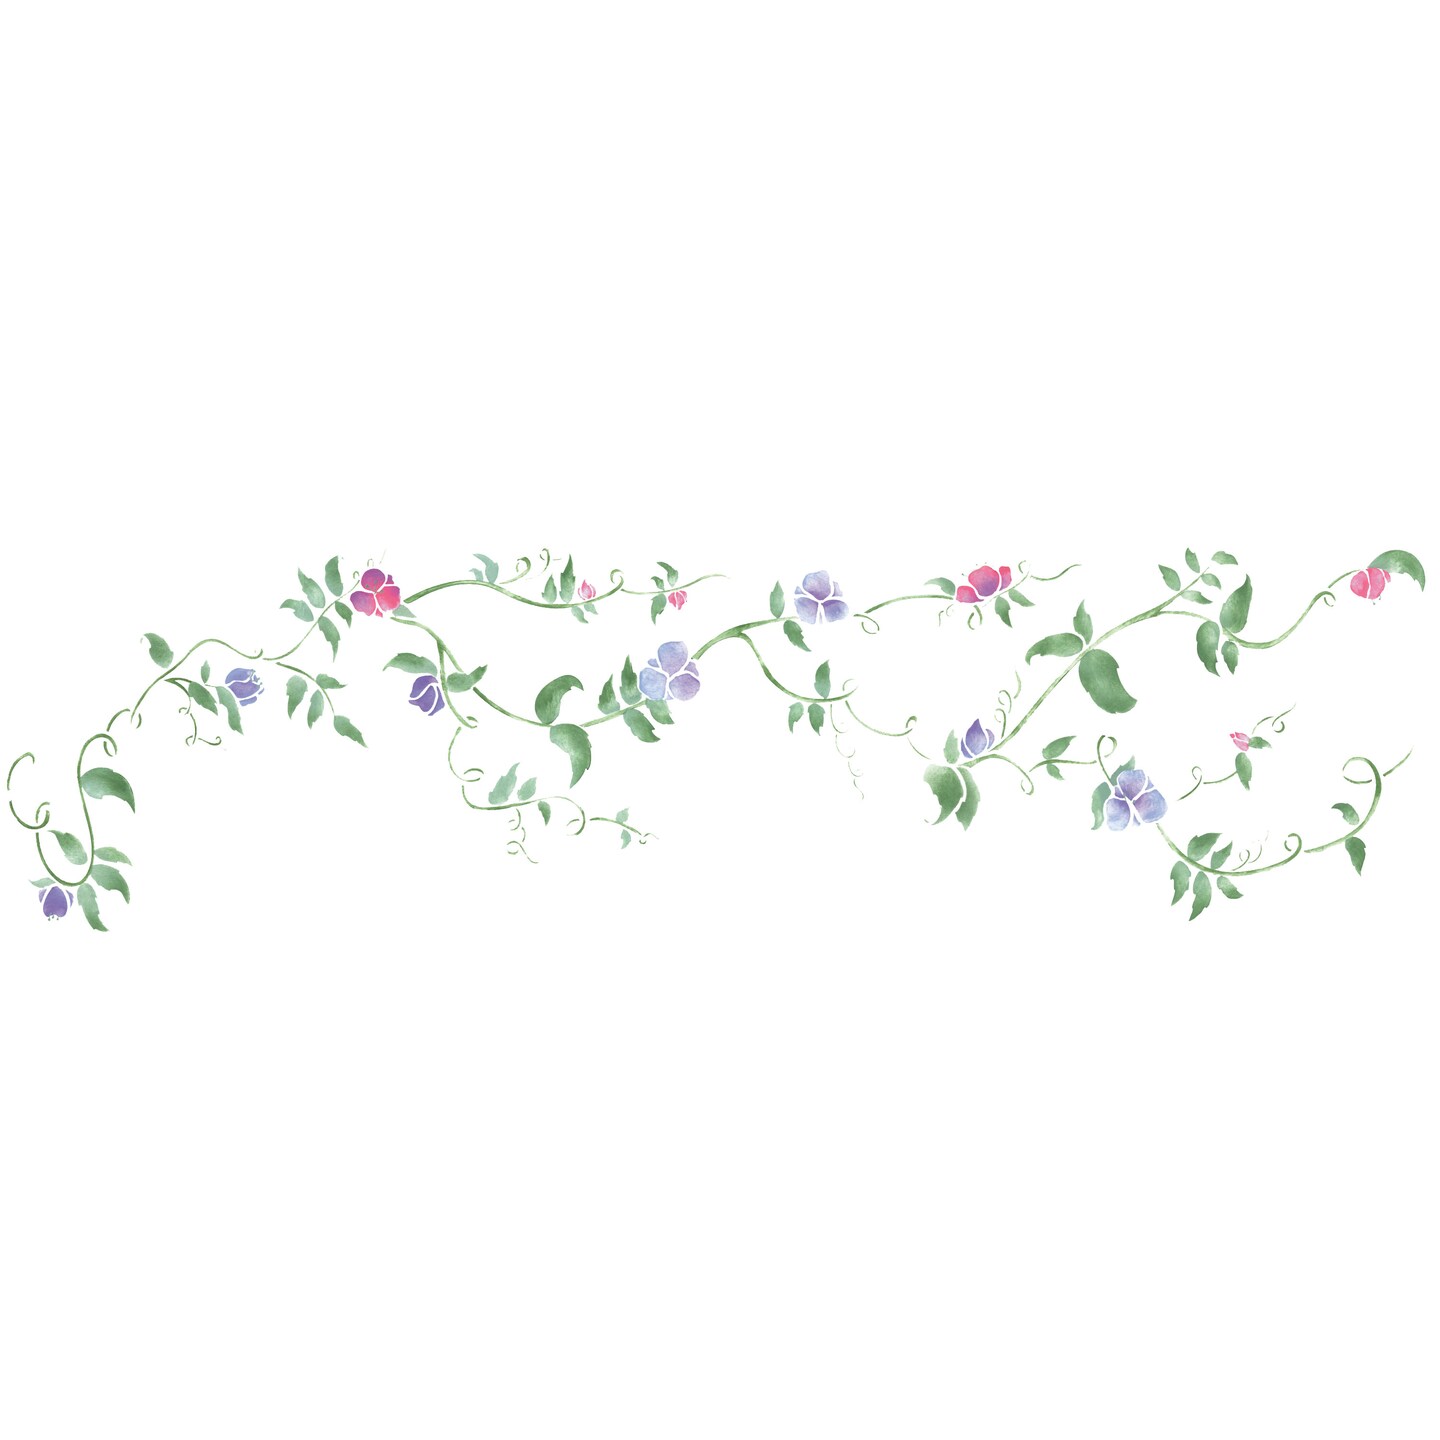 Sweet Peas Flower Vine Wall Stencil | 2723 by Designer Stencils | Floral Stencils | Reusable Art Craft Stencils for Painting on Walls, Canvas, Wood | Reusable Plastic Paint Stencil for Home Makeover | Easy to Use &#x26; Clean Art Stencil